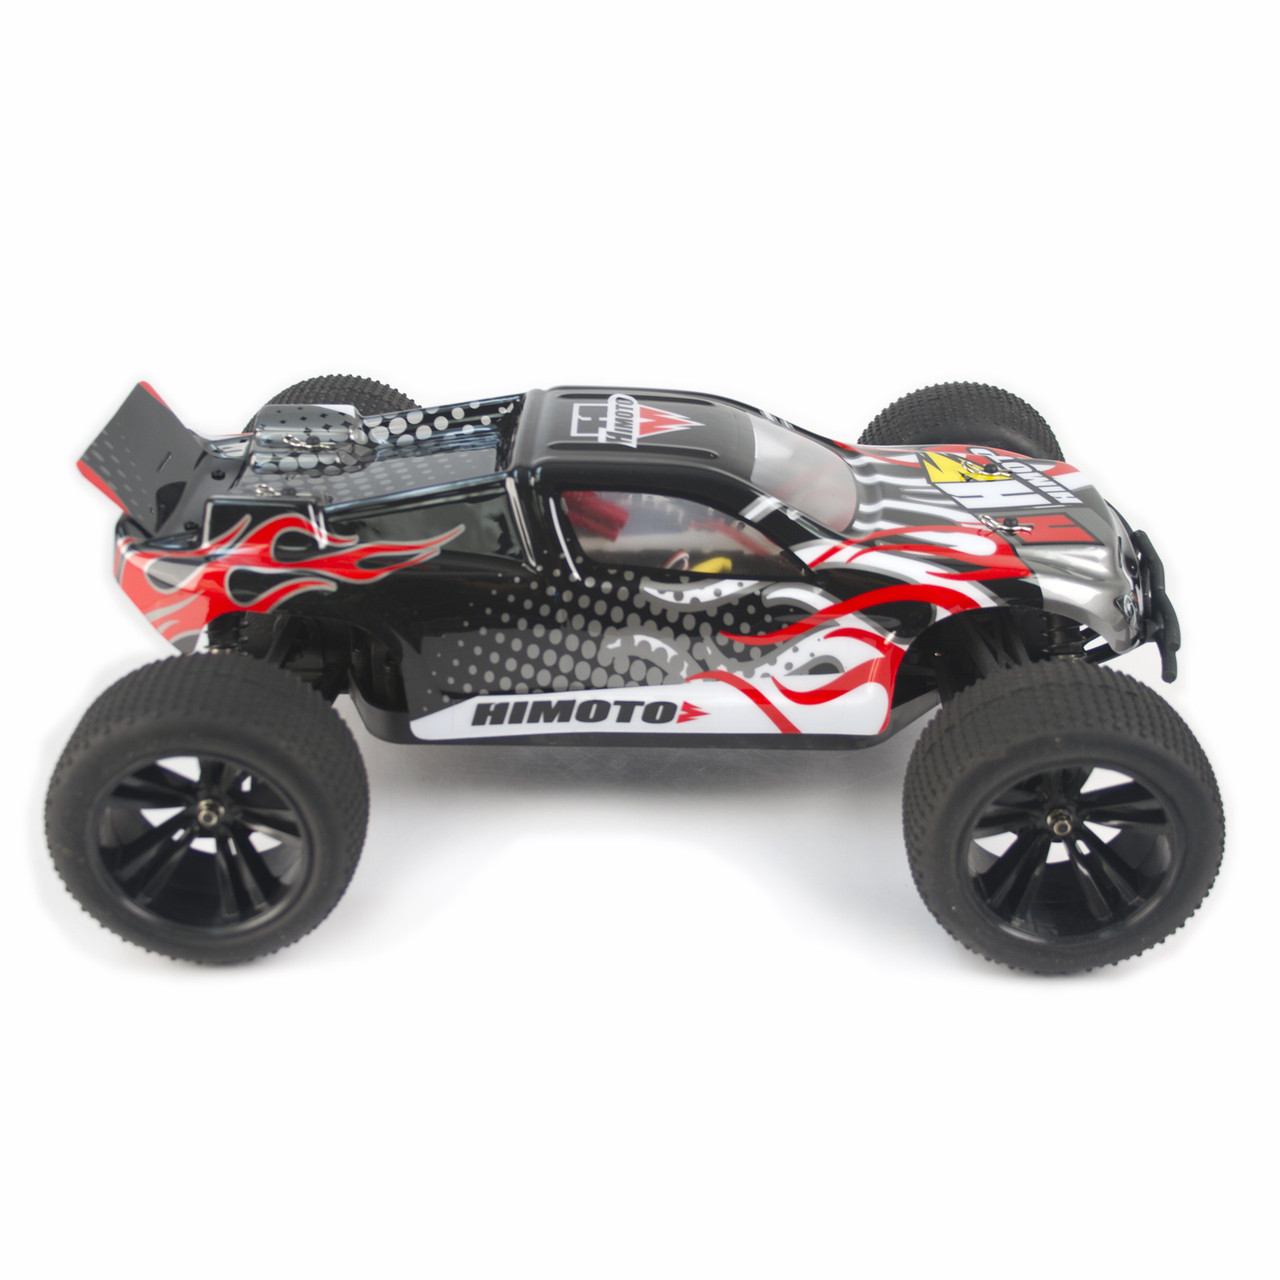 10th scale truggy